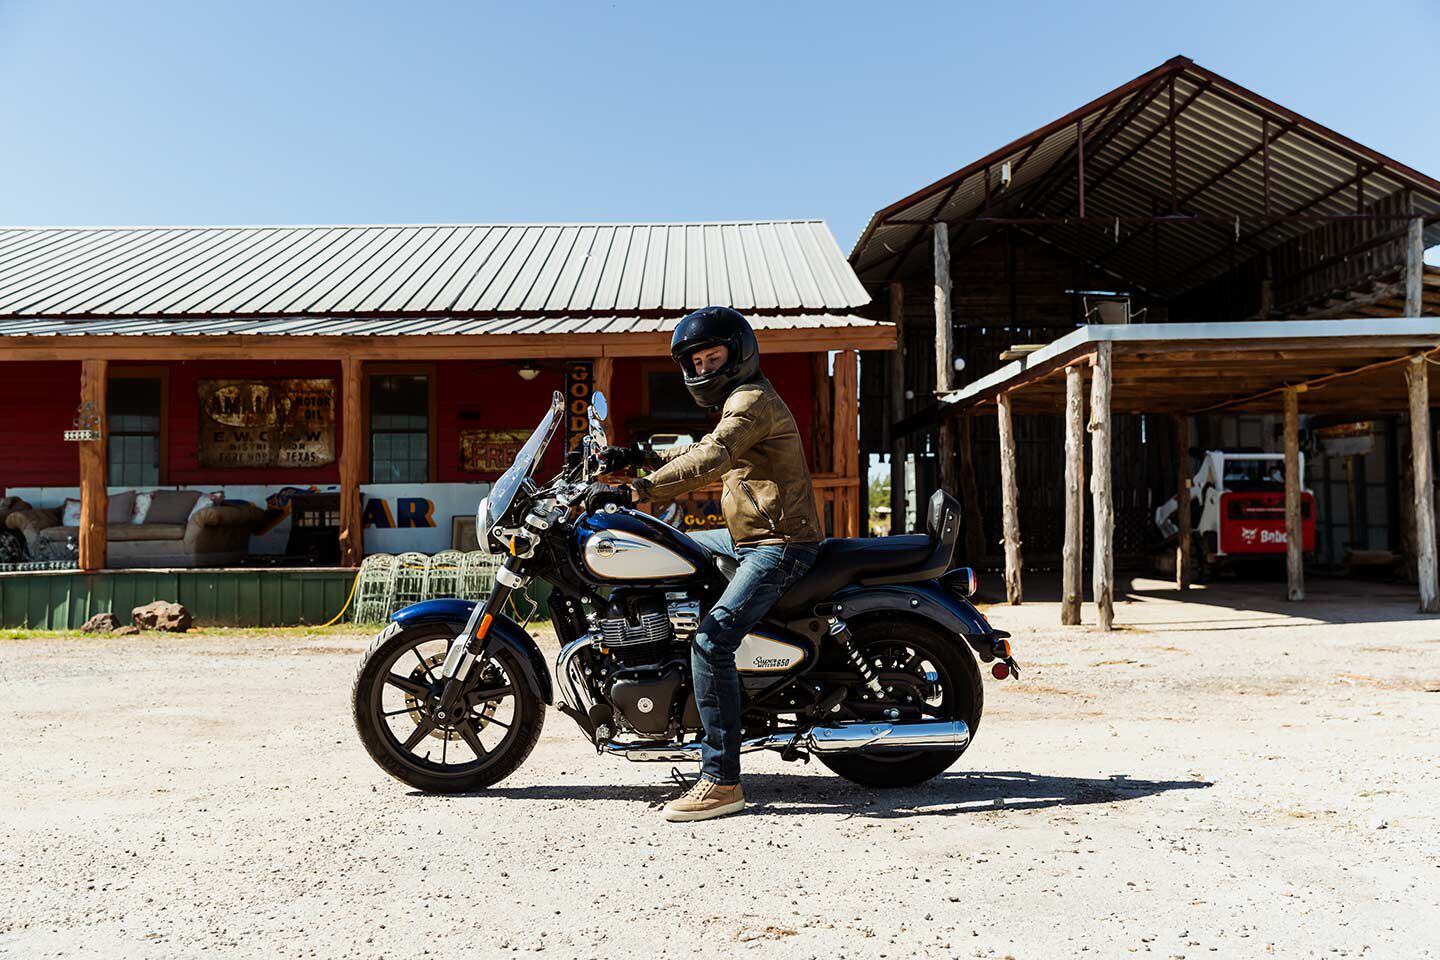 The classic styling of the Super Meteor 650 gives the motorcycle a timeless appearance.